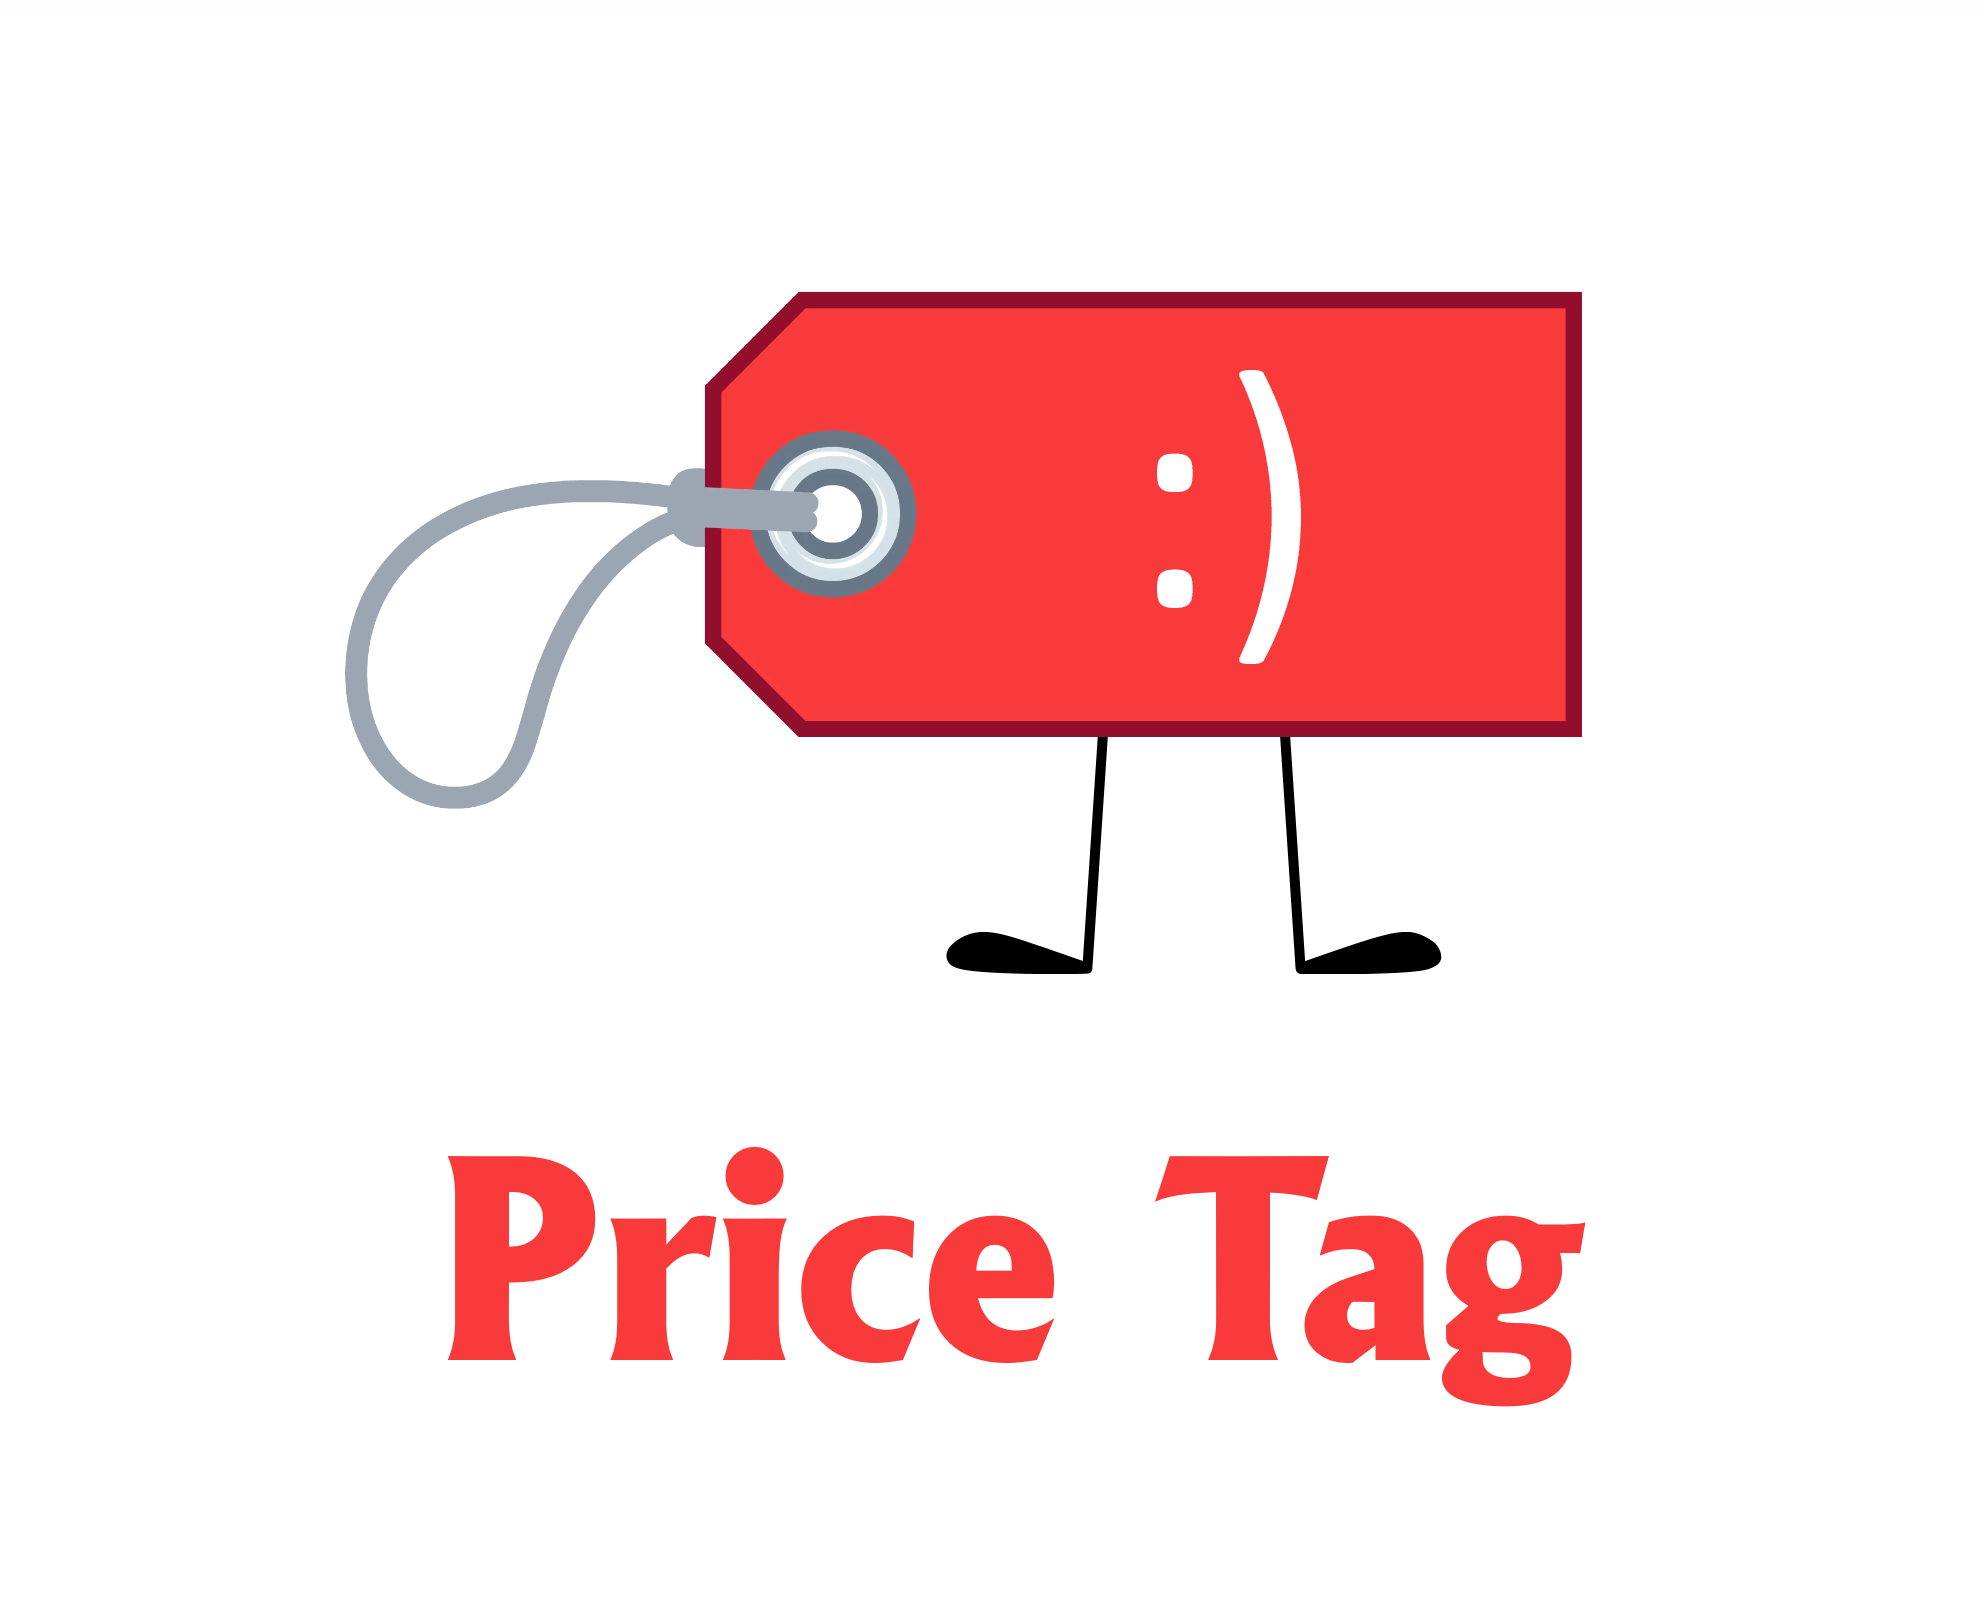 Price Tag by lukesamsthesecond on DeviantArt